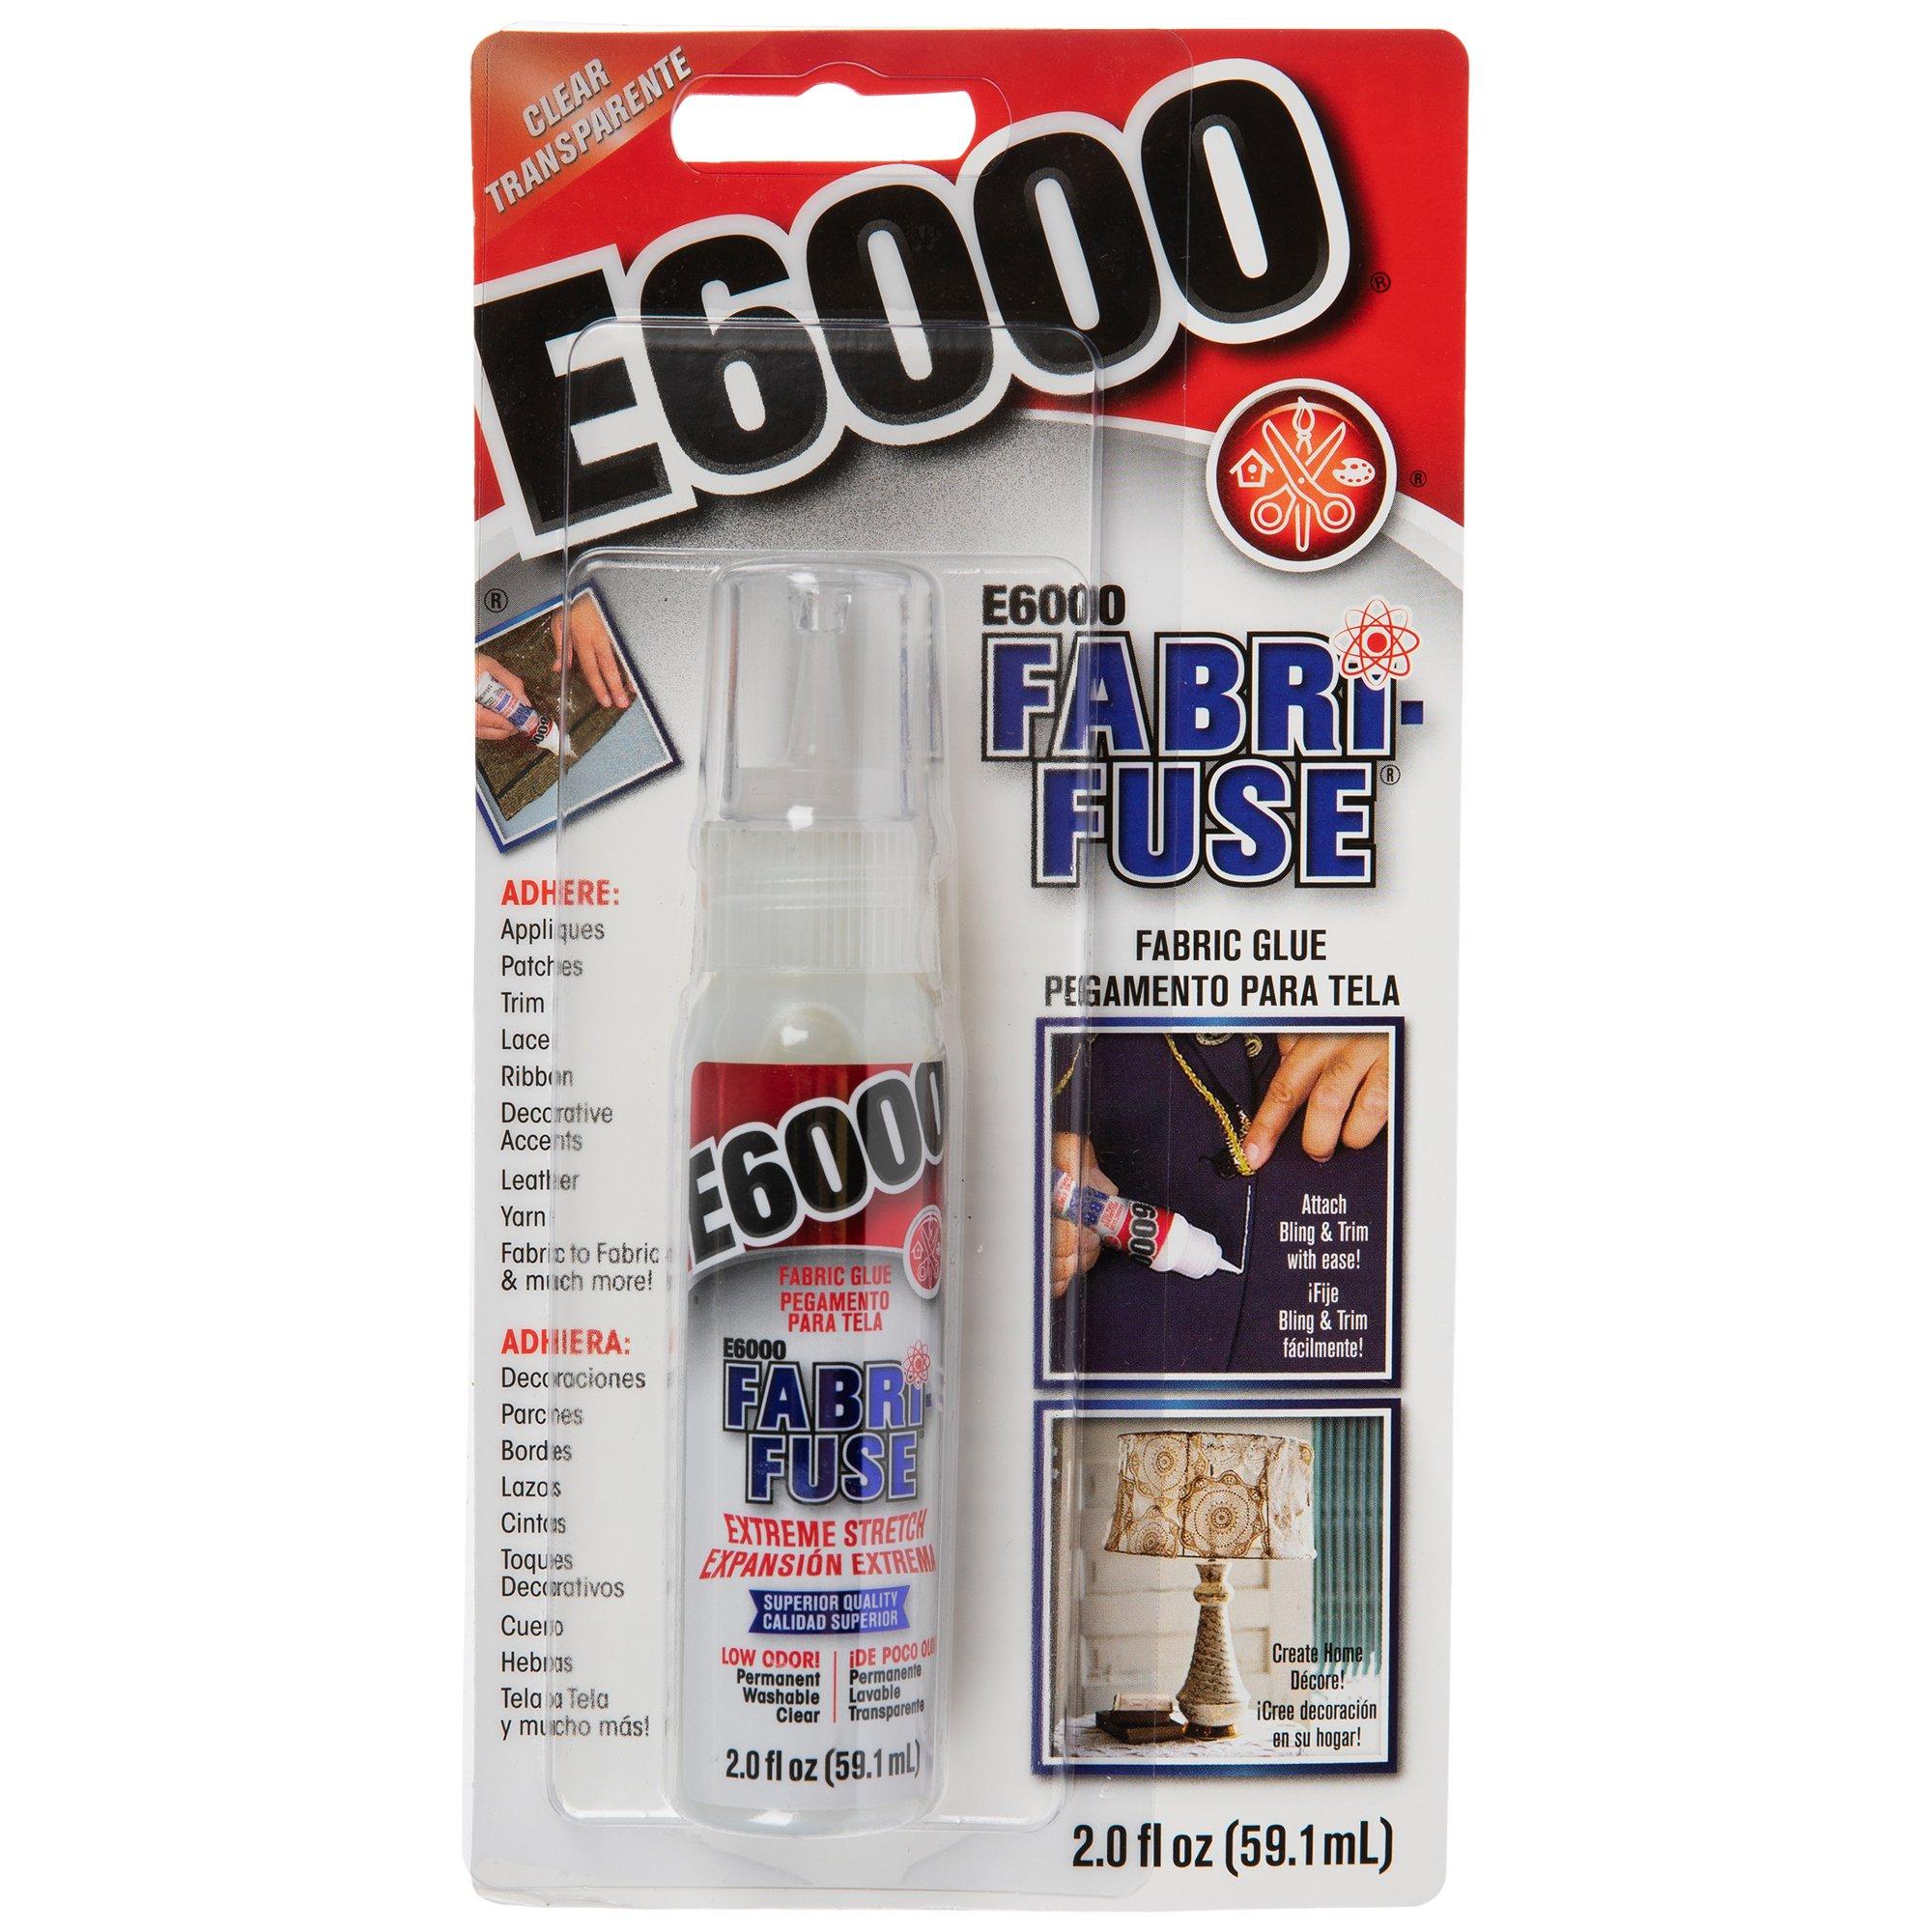 E6000 Fabri-Fuse Fabric Adhesive Glue (4-Ounce), for Rhinestones, Gems,  5-Pack Pixiss Wooden Handle Stylus Applicator Pens - Yahoo Shopping